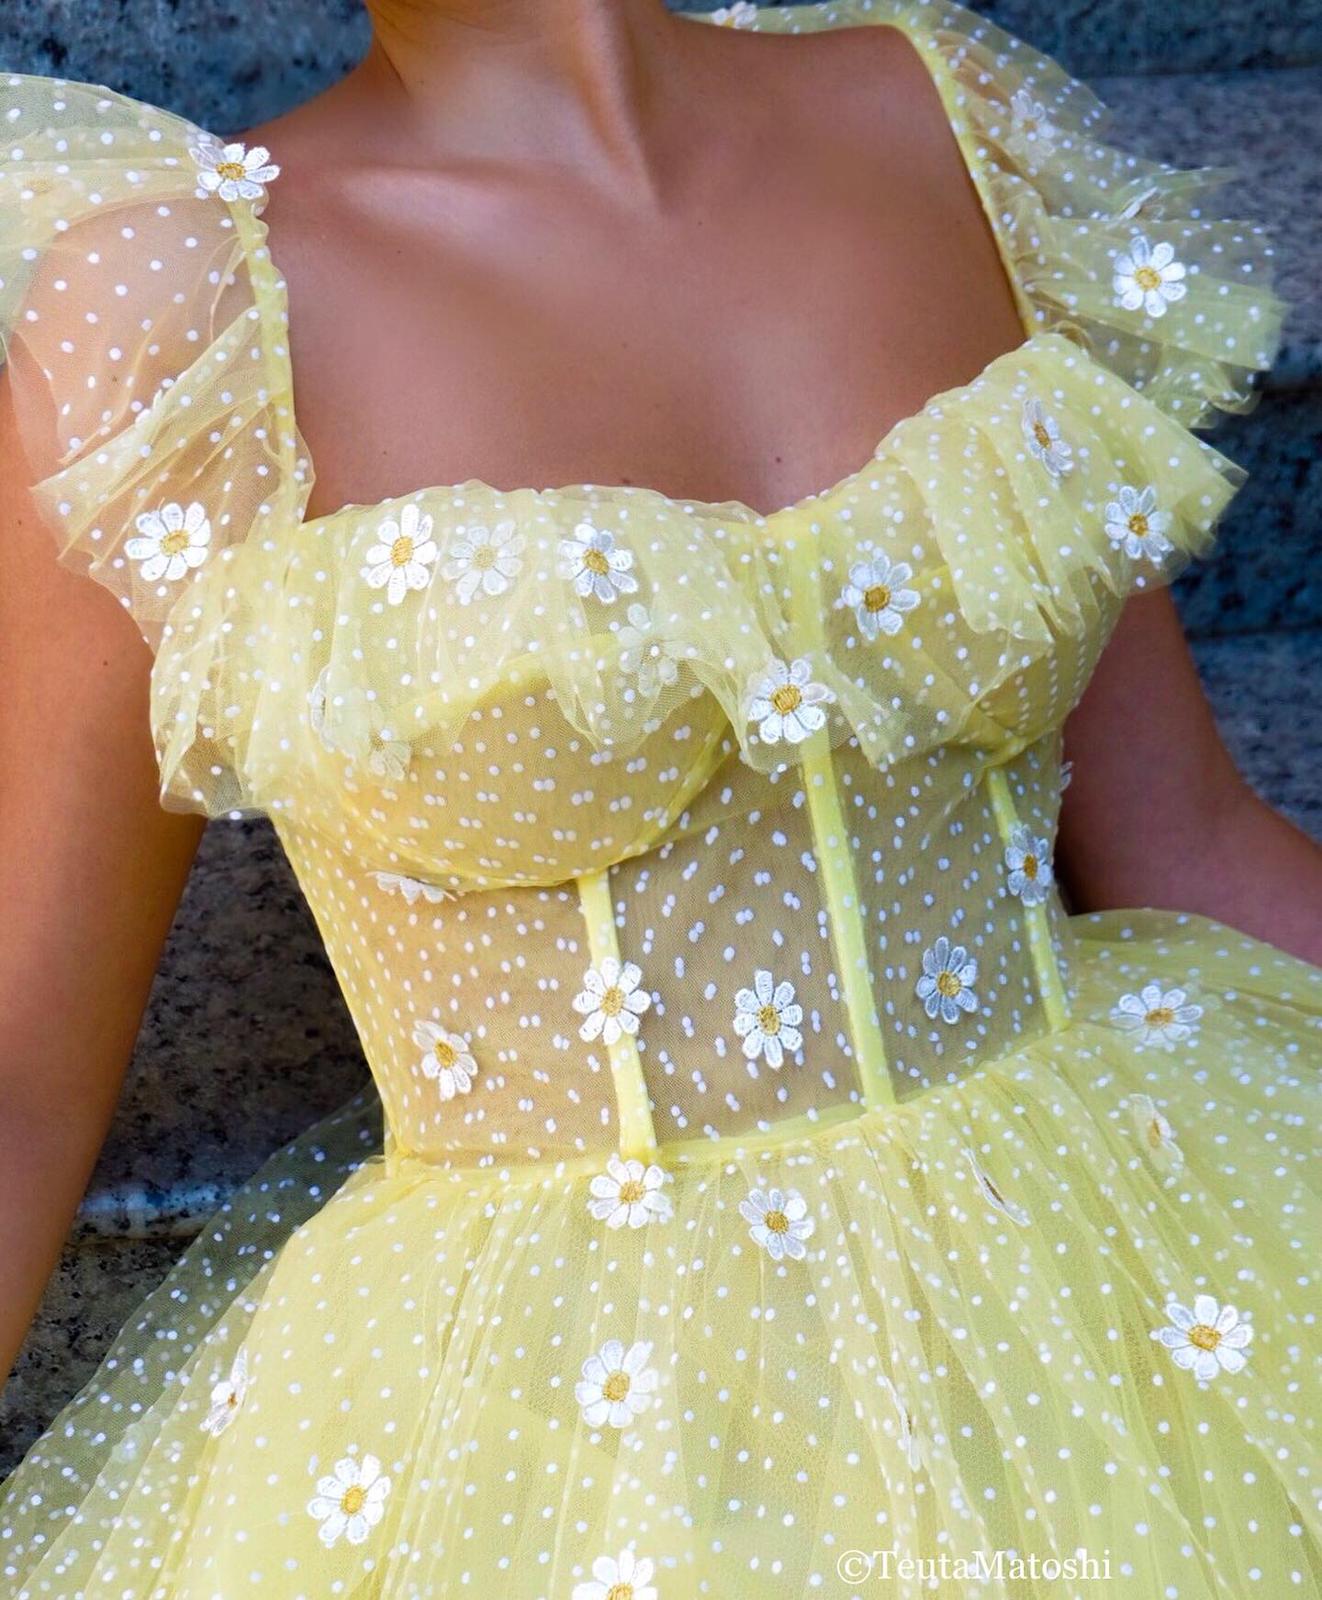 Yellow A-Line dress with dotted fabric and embroidered daisies